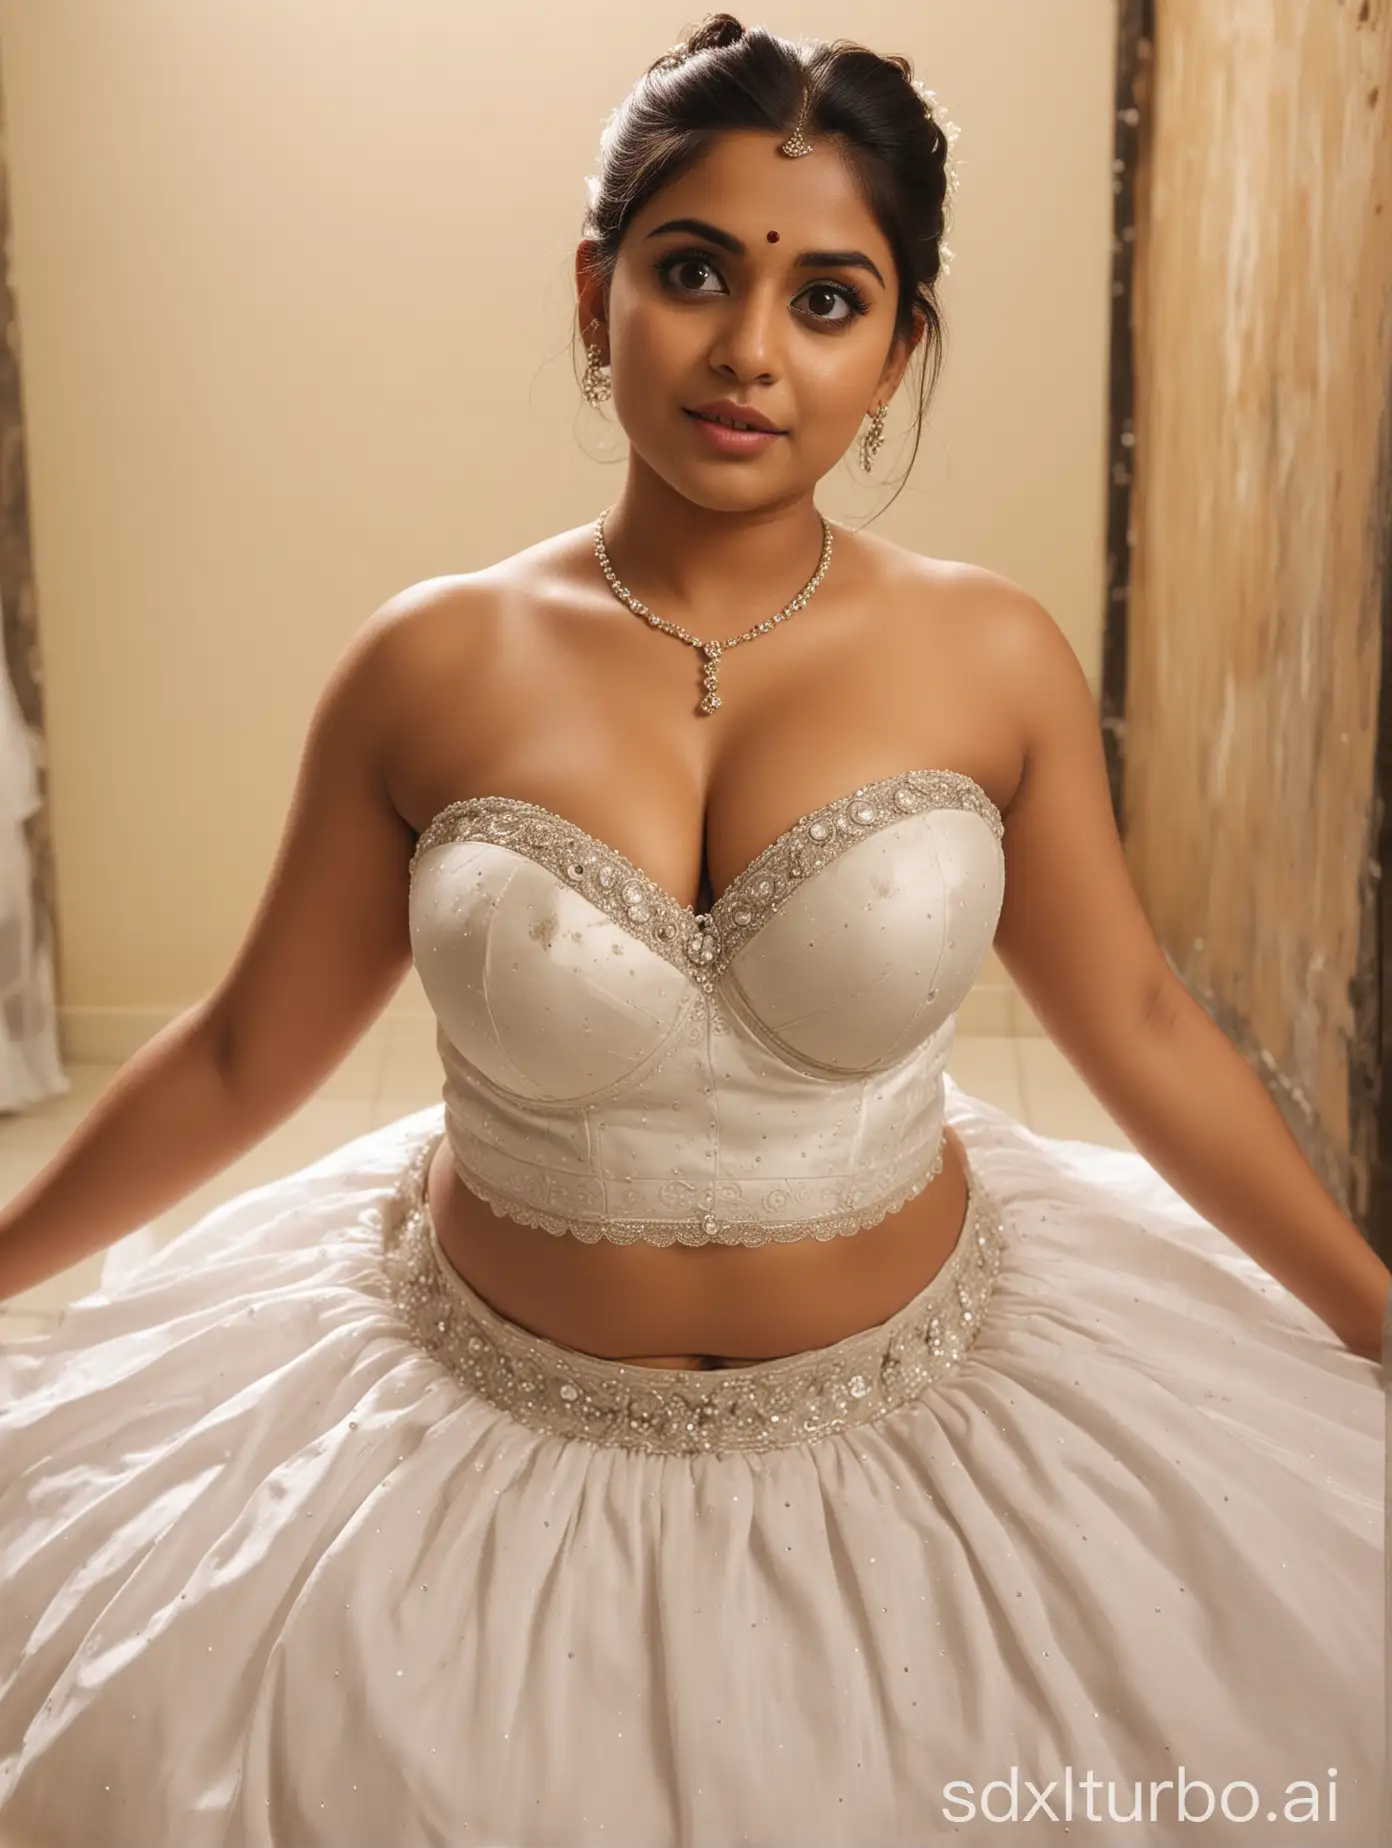 Curvy-Indian-Church-Bride-with-Plump-Body-in-WellLit-Dressing-Room